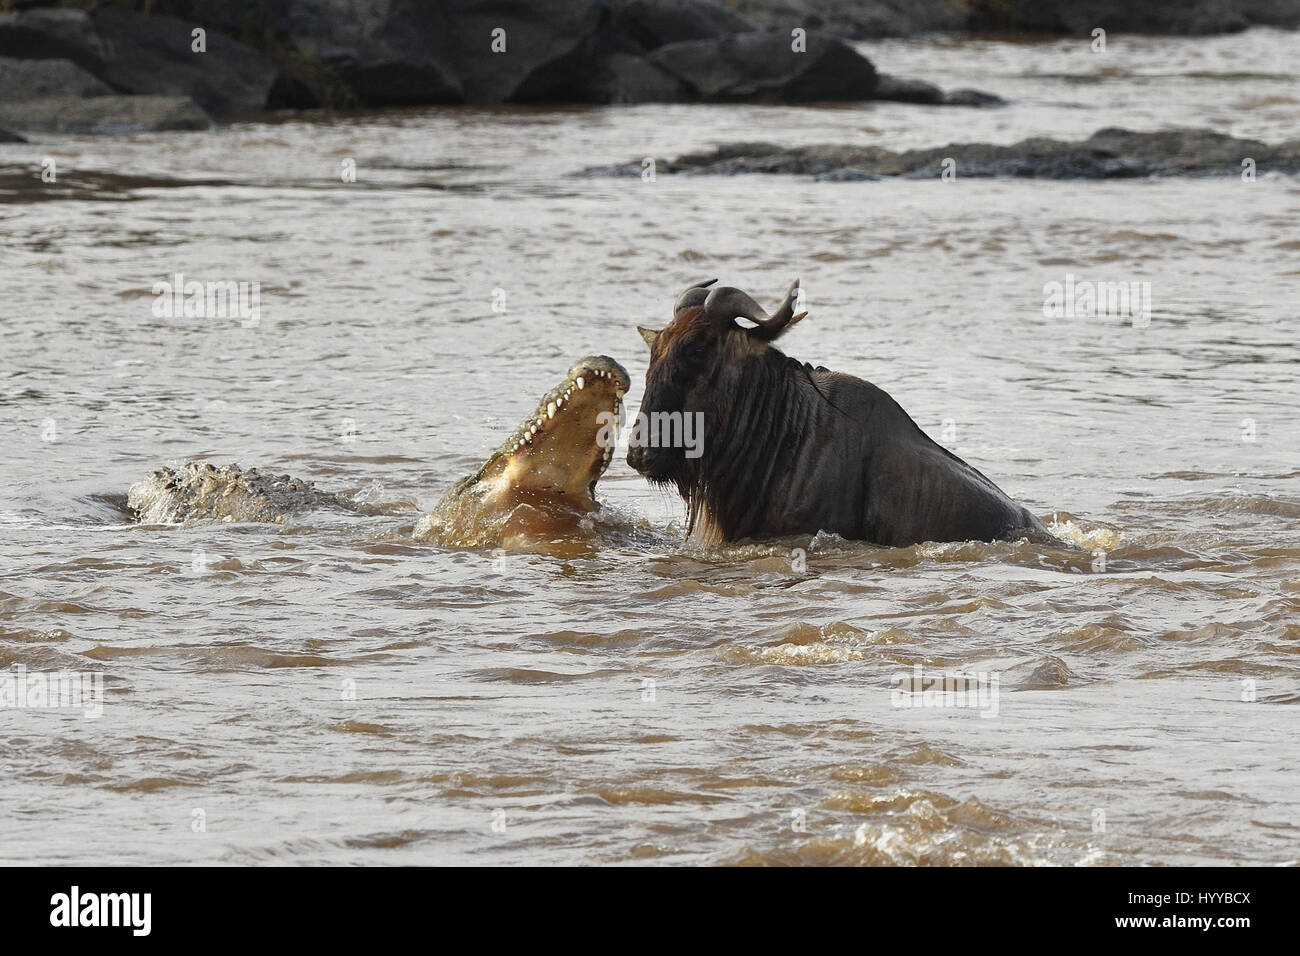 MASAI MARA, KENYA: DRAMATIC images have revealed the moment a hungry 880-pound crocodile emerged from the water to attack one unlucky wildebeest crossing a river. The incredible pictures show the crafty croc stealthily swim towards the wildebeest before flinging open its jaws to sink its teeth into its neck. Subsequent photos show the Wildebeest rising out of the water trying to escape from its predator as its friends casually stroll by. The amazing images were taken at the Mara River, Masai Mara, Kenya by dental technician, Elmar Weiss (46). To take his pictures, Elmar used a Nikon D500 camer Stock Photo